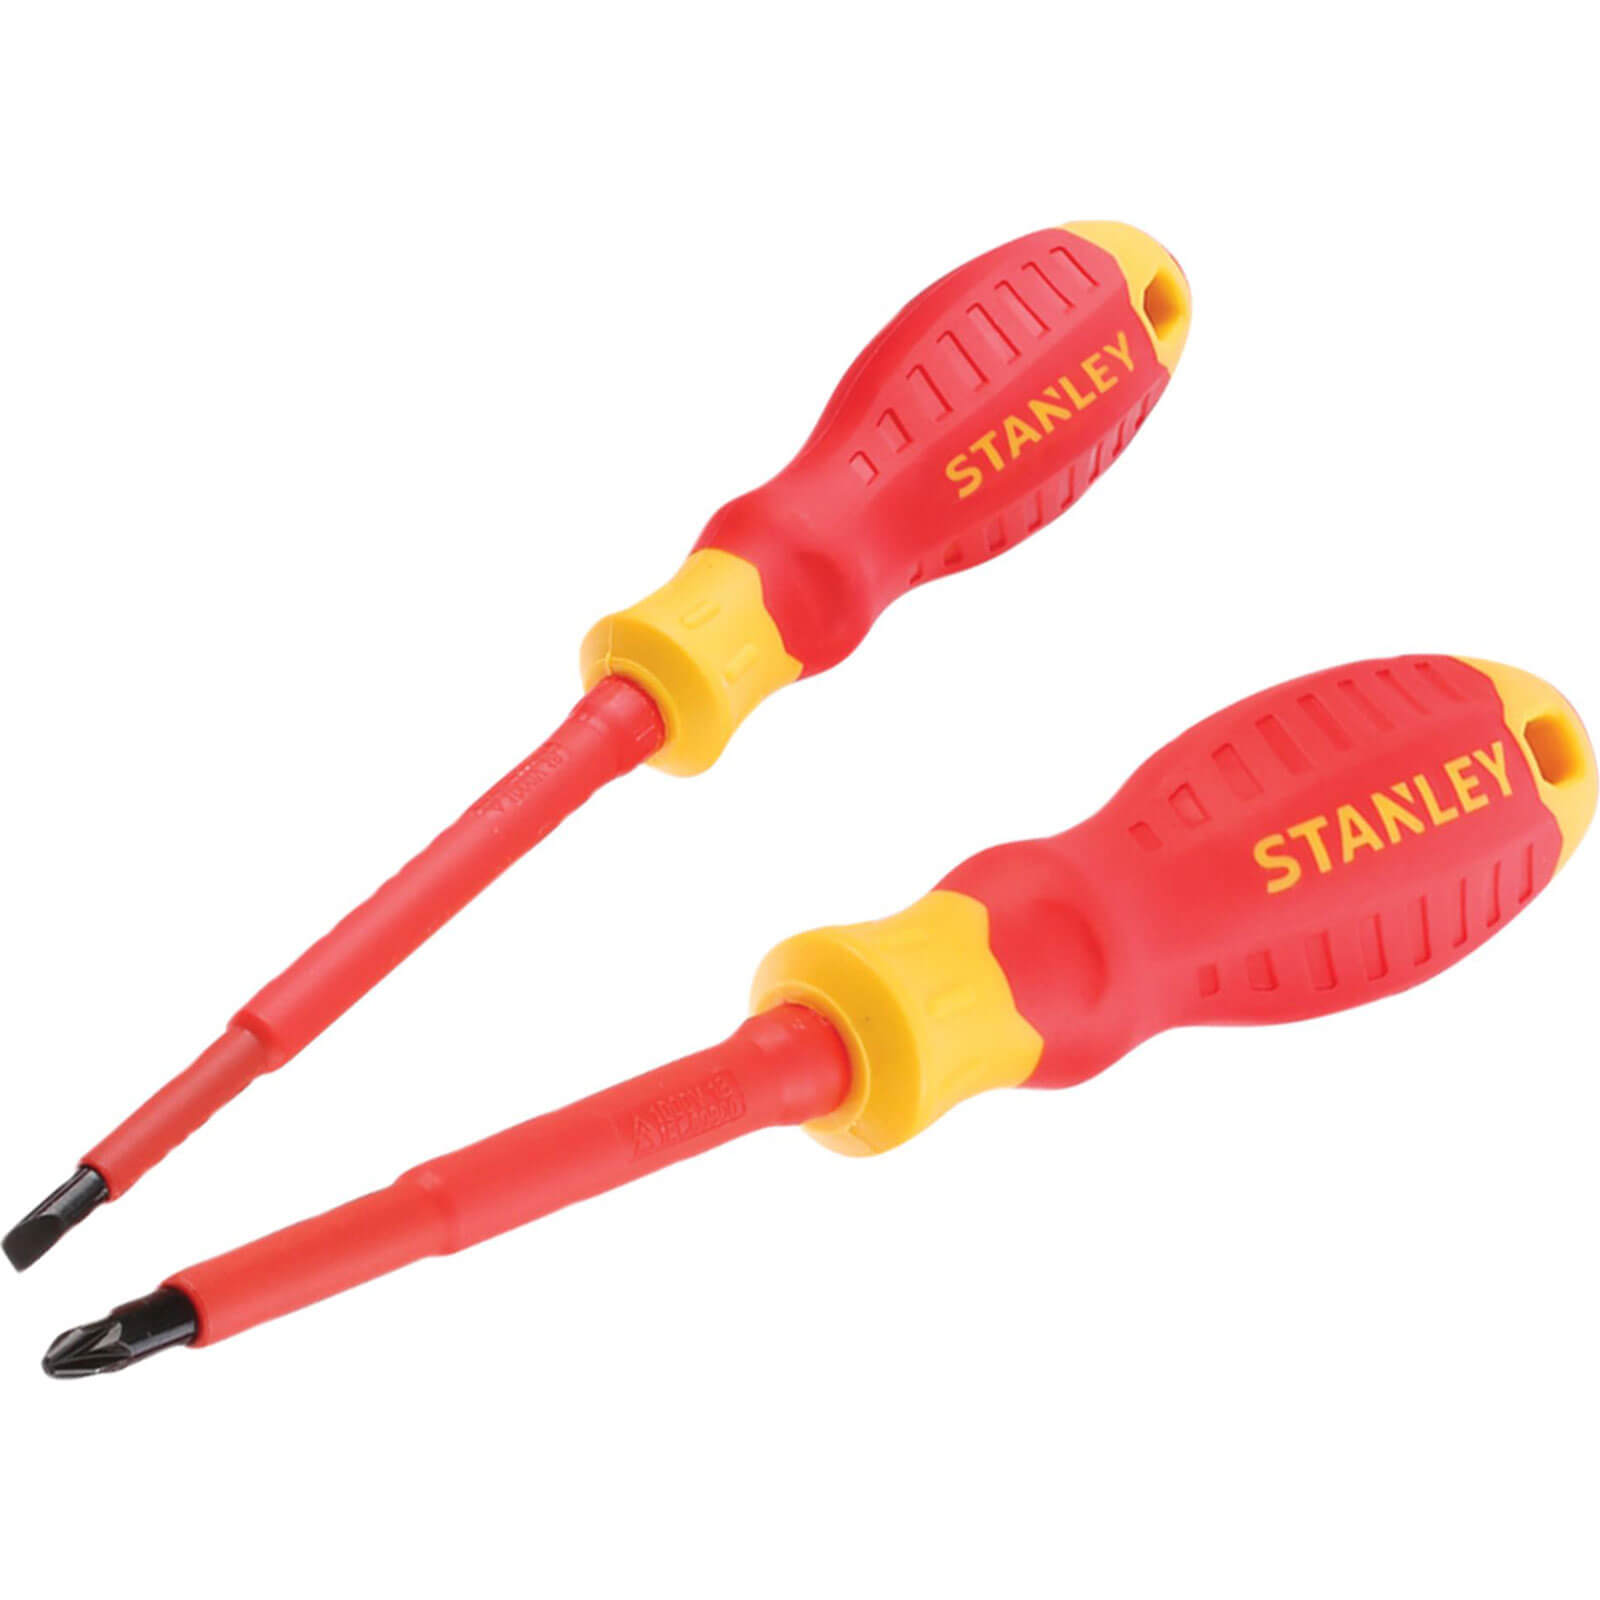 Image of Stanley FatMax 2 Piece VDE Insulated Pozi and Slotted Screwdriver Set